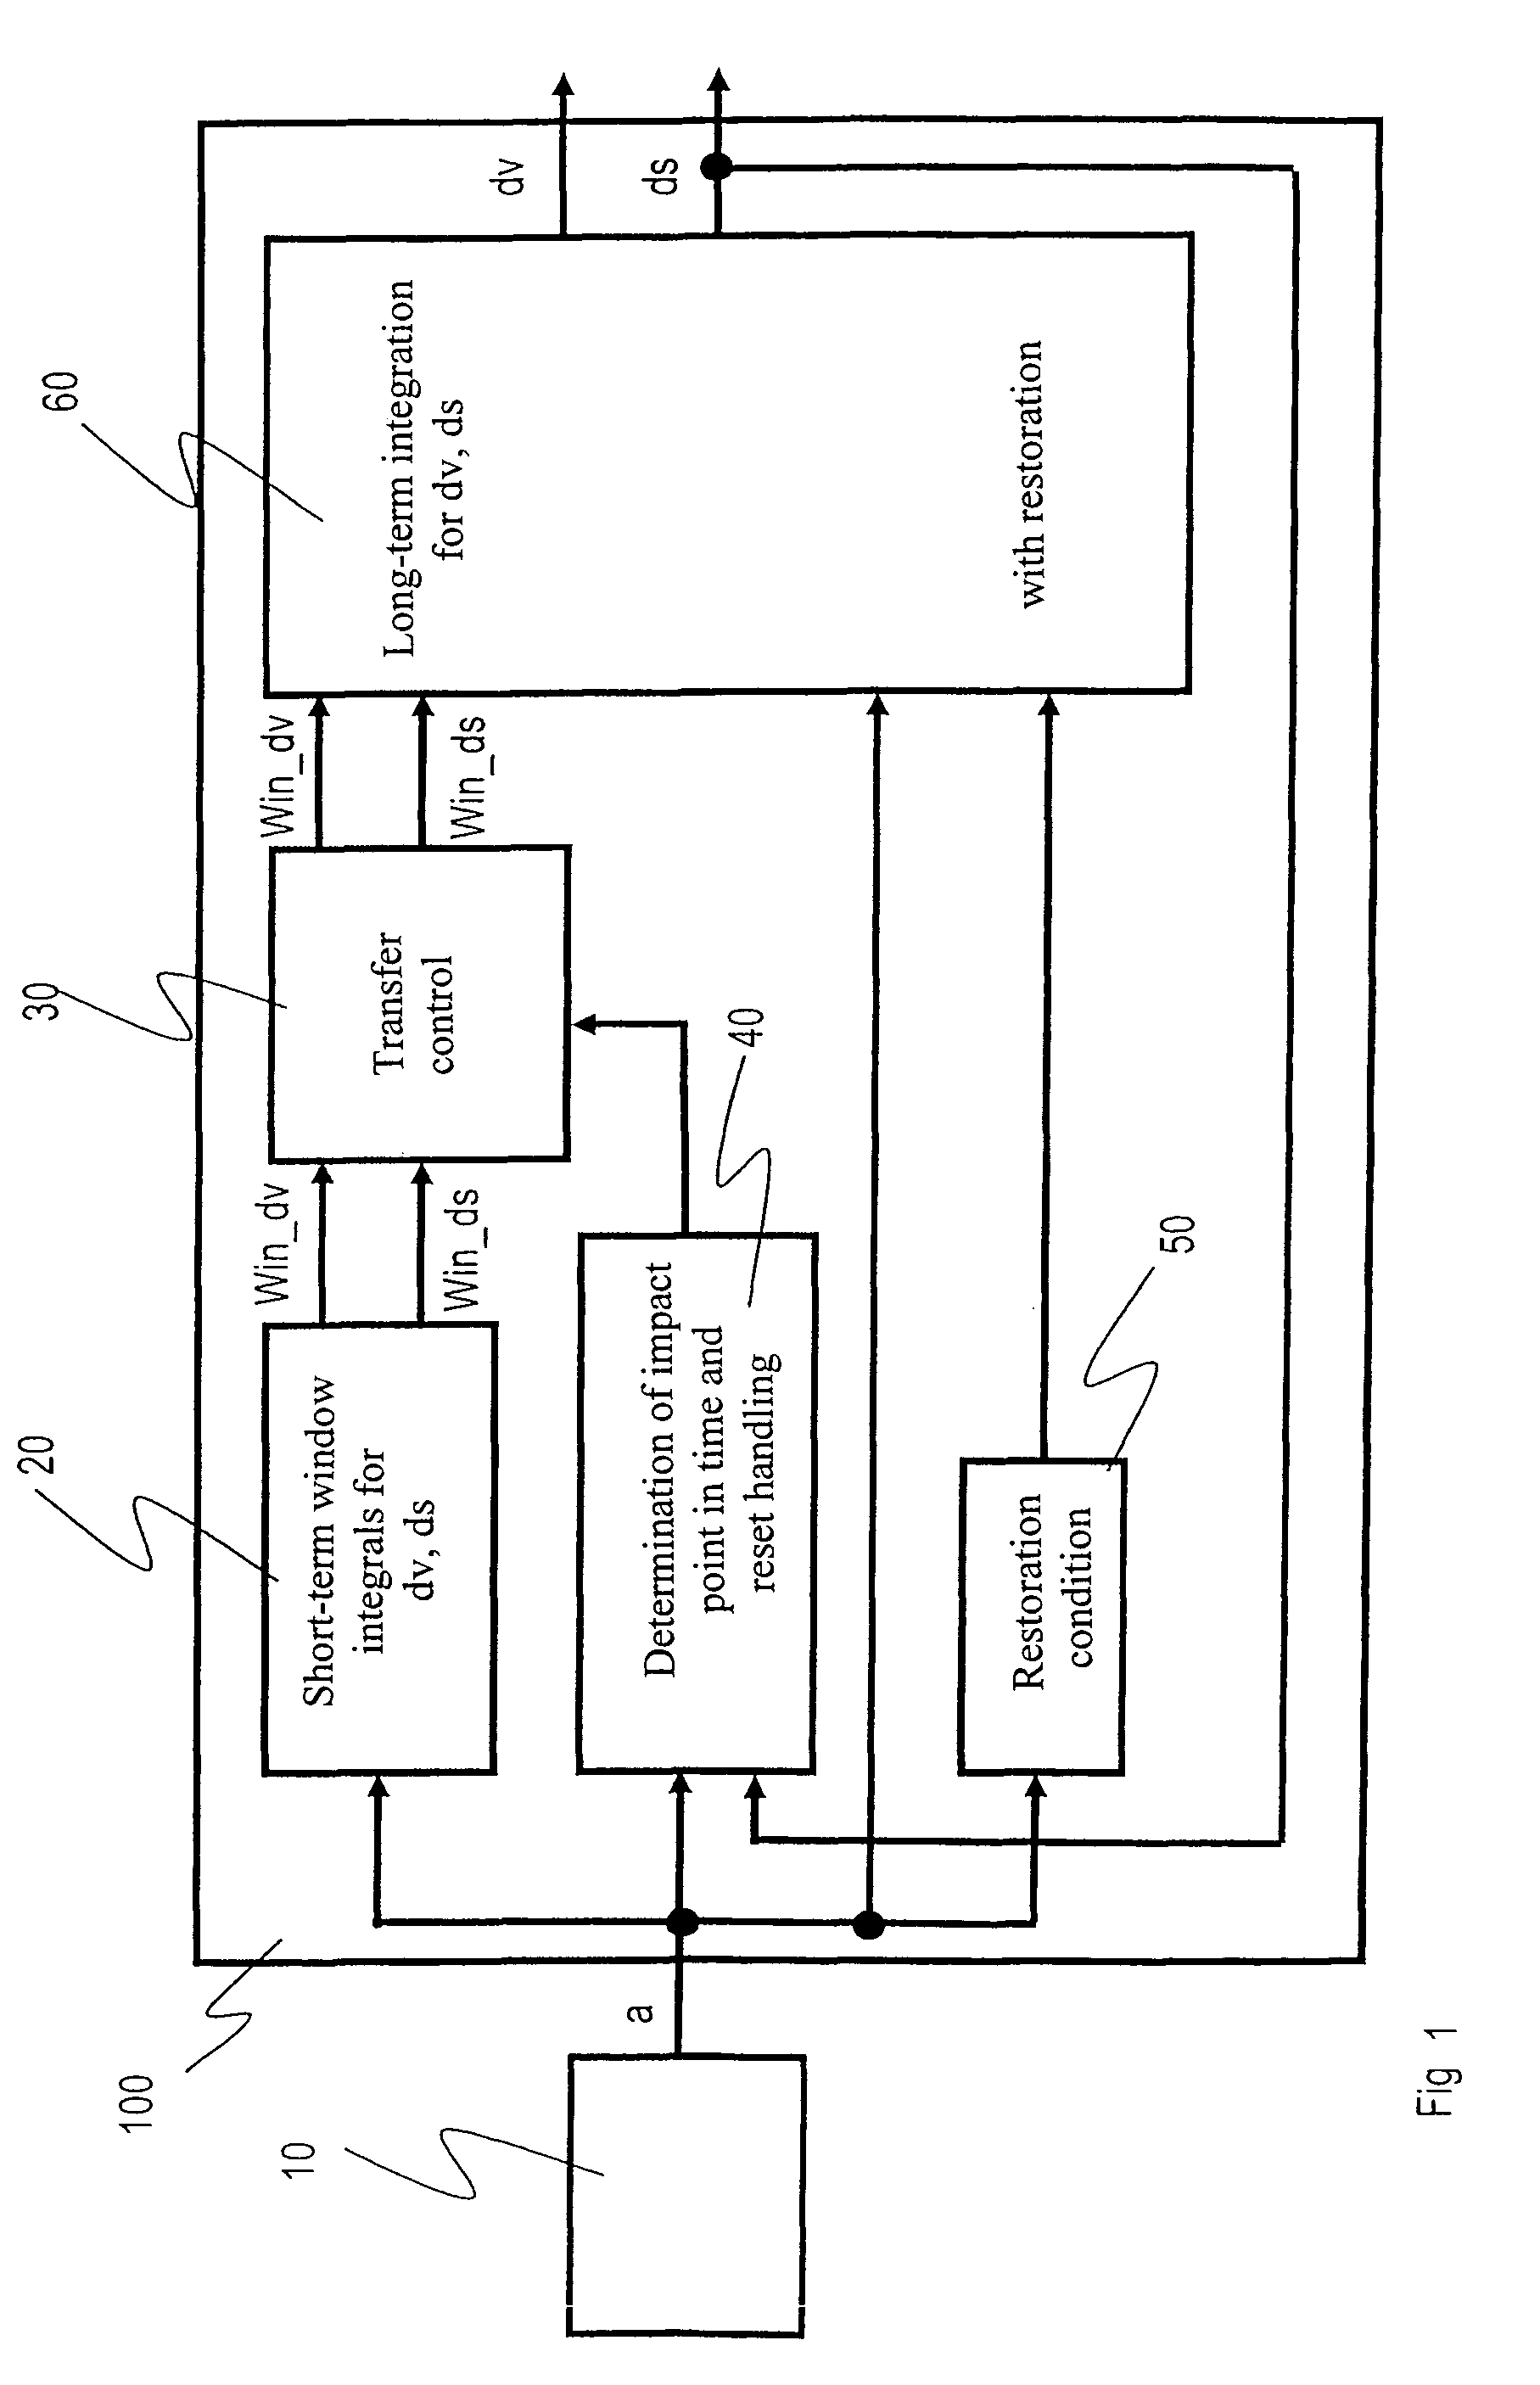 Method and device for generating at least one feature for an occupant protection system